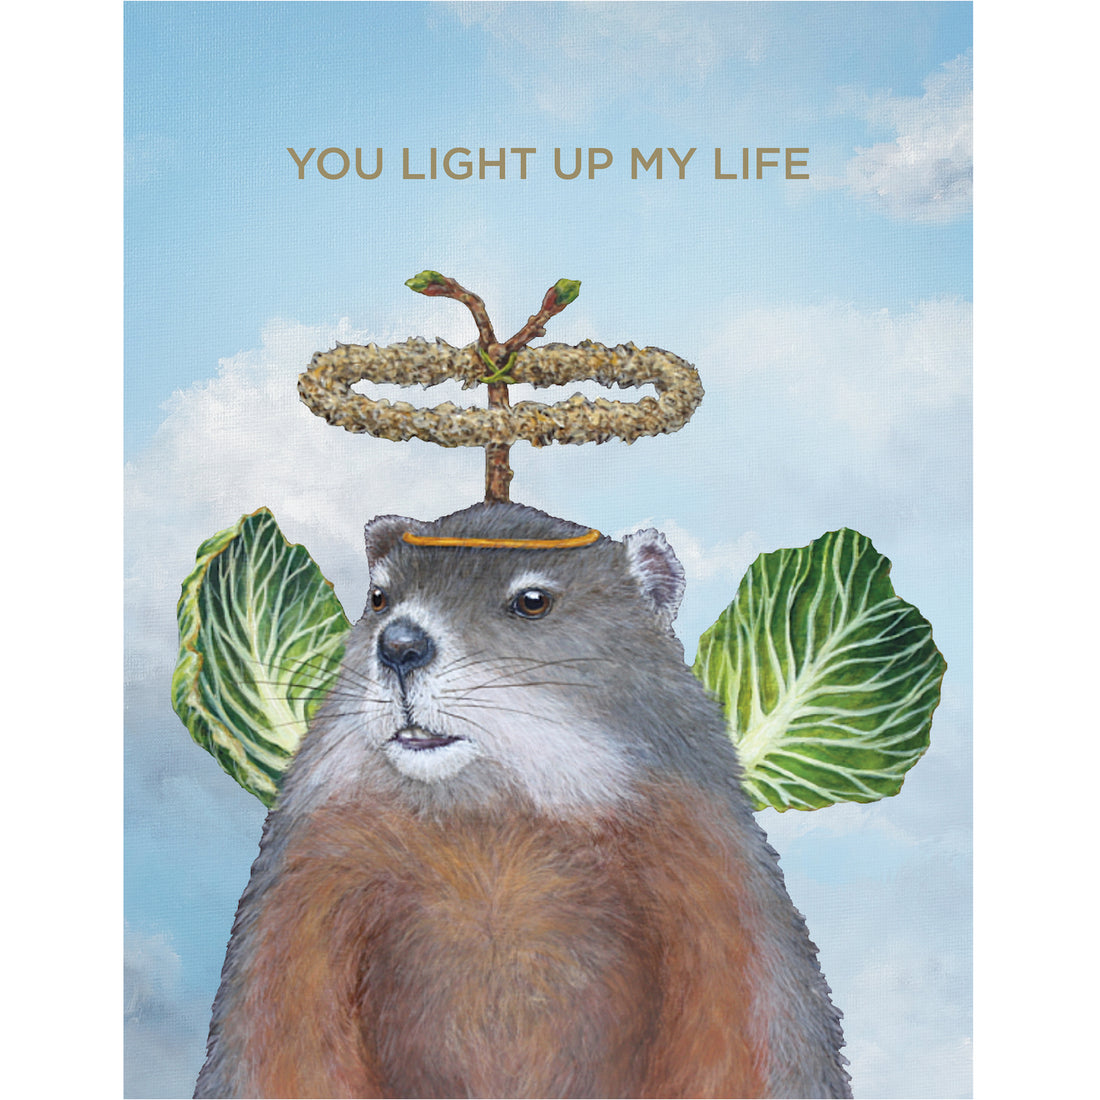 A delightful Hester &amp; Cook Angelic Groundhog greeting card featuring whimsical artwork. This charming card is designed to light up your loved one&